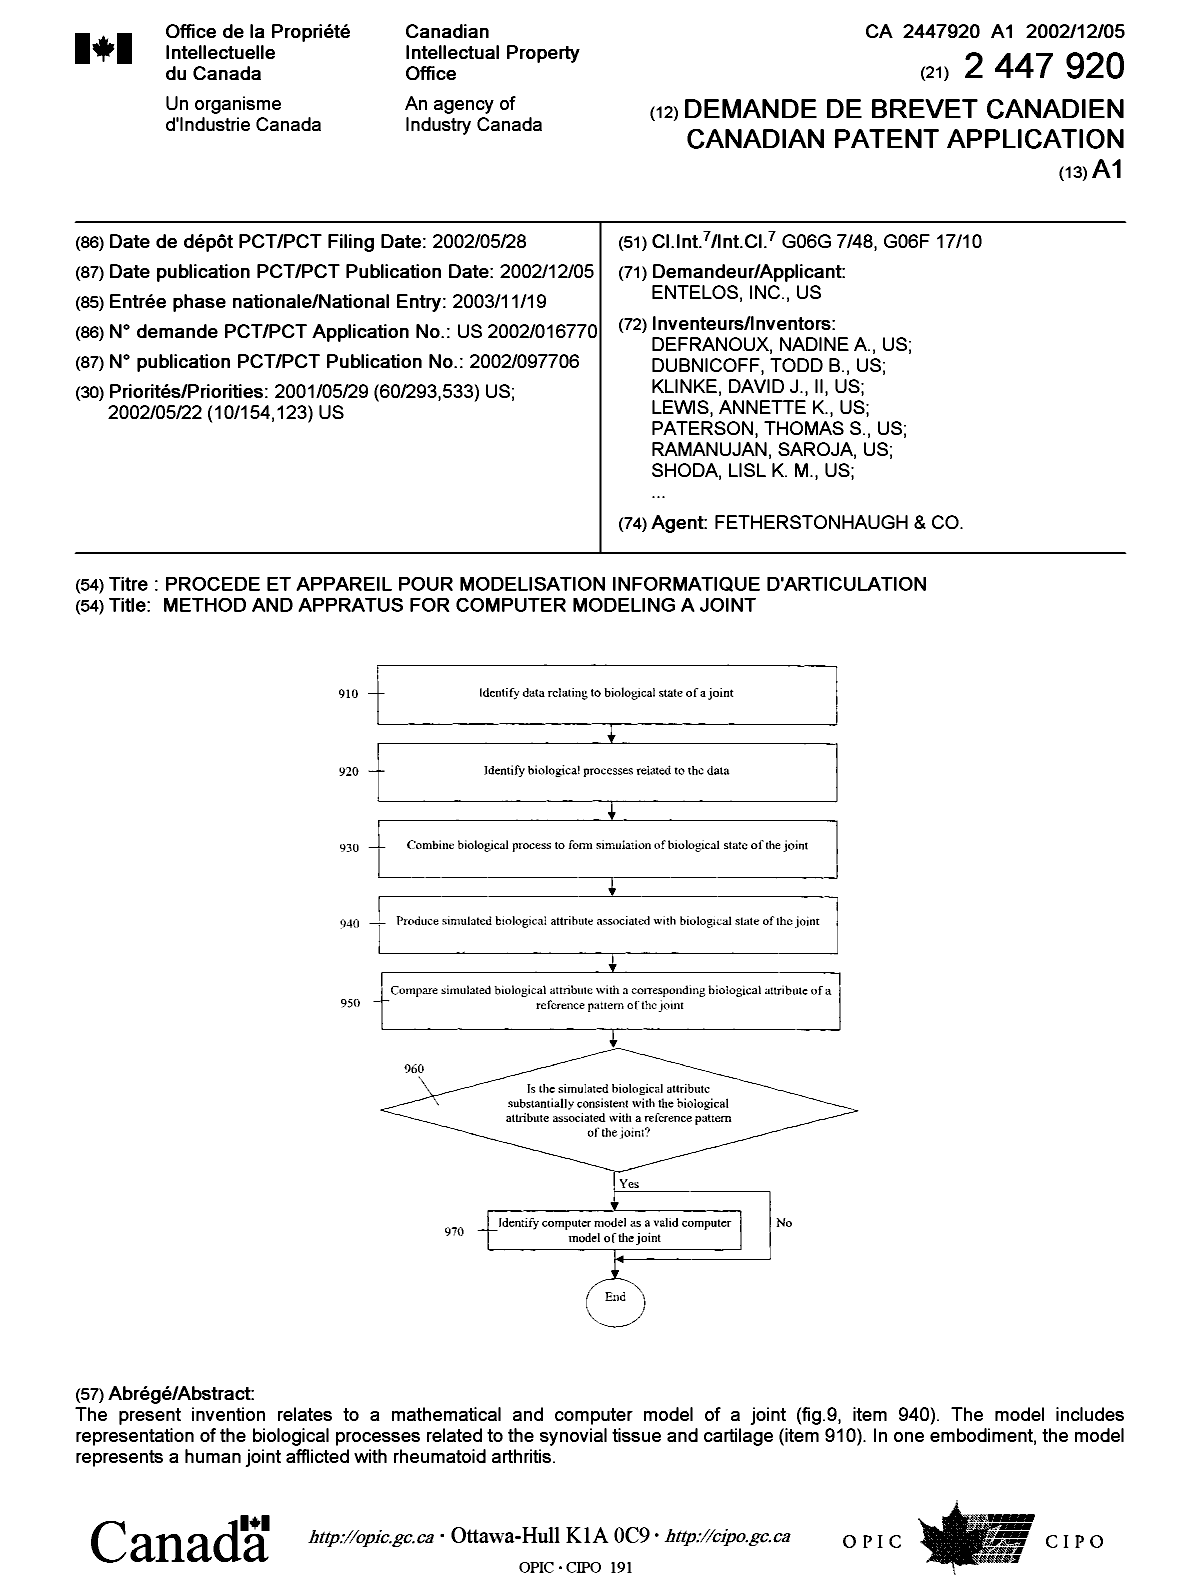 Canadian Patent Document 2447920. Cover Page 20040202. Image 1 of 2